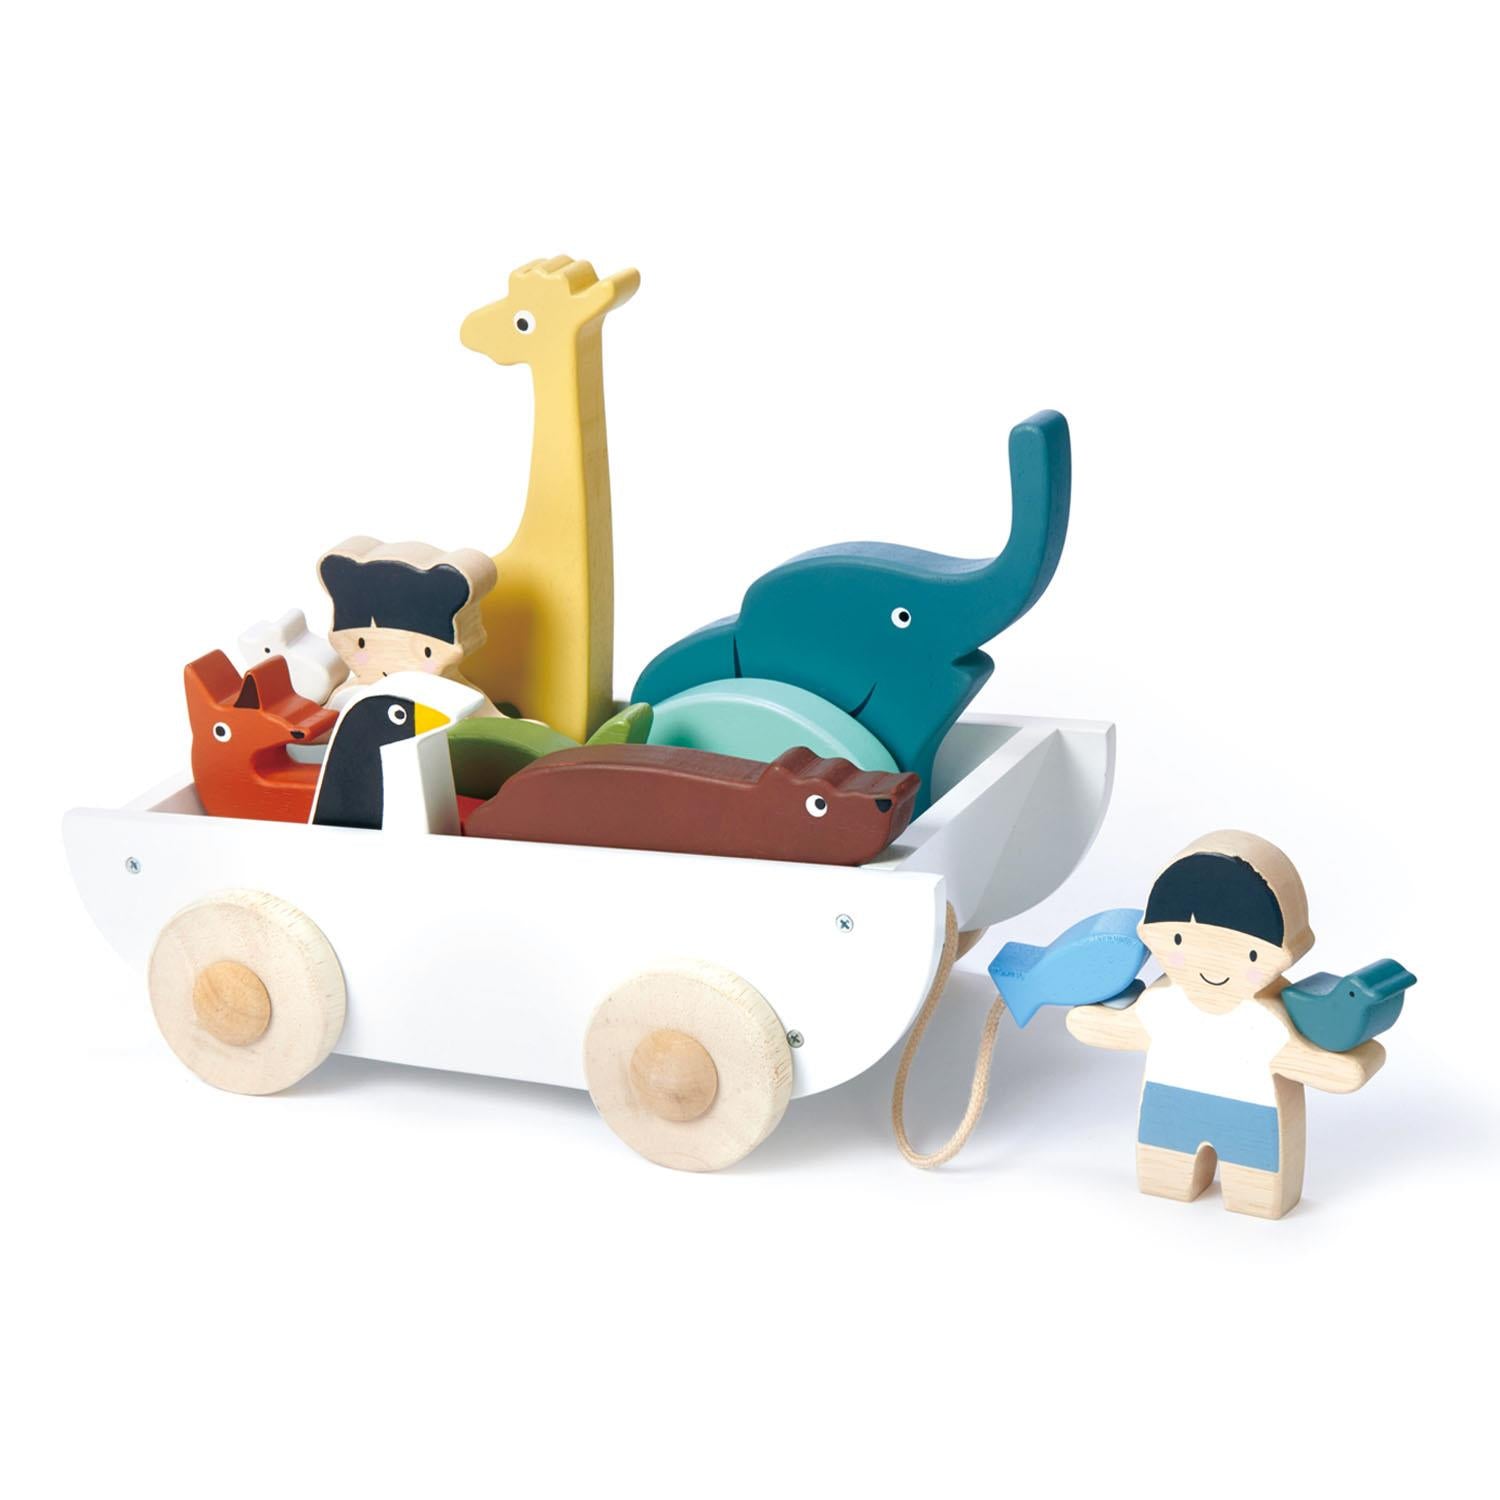 Tender Leaf Toys The Friend Pull Along Ship with Animals